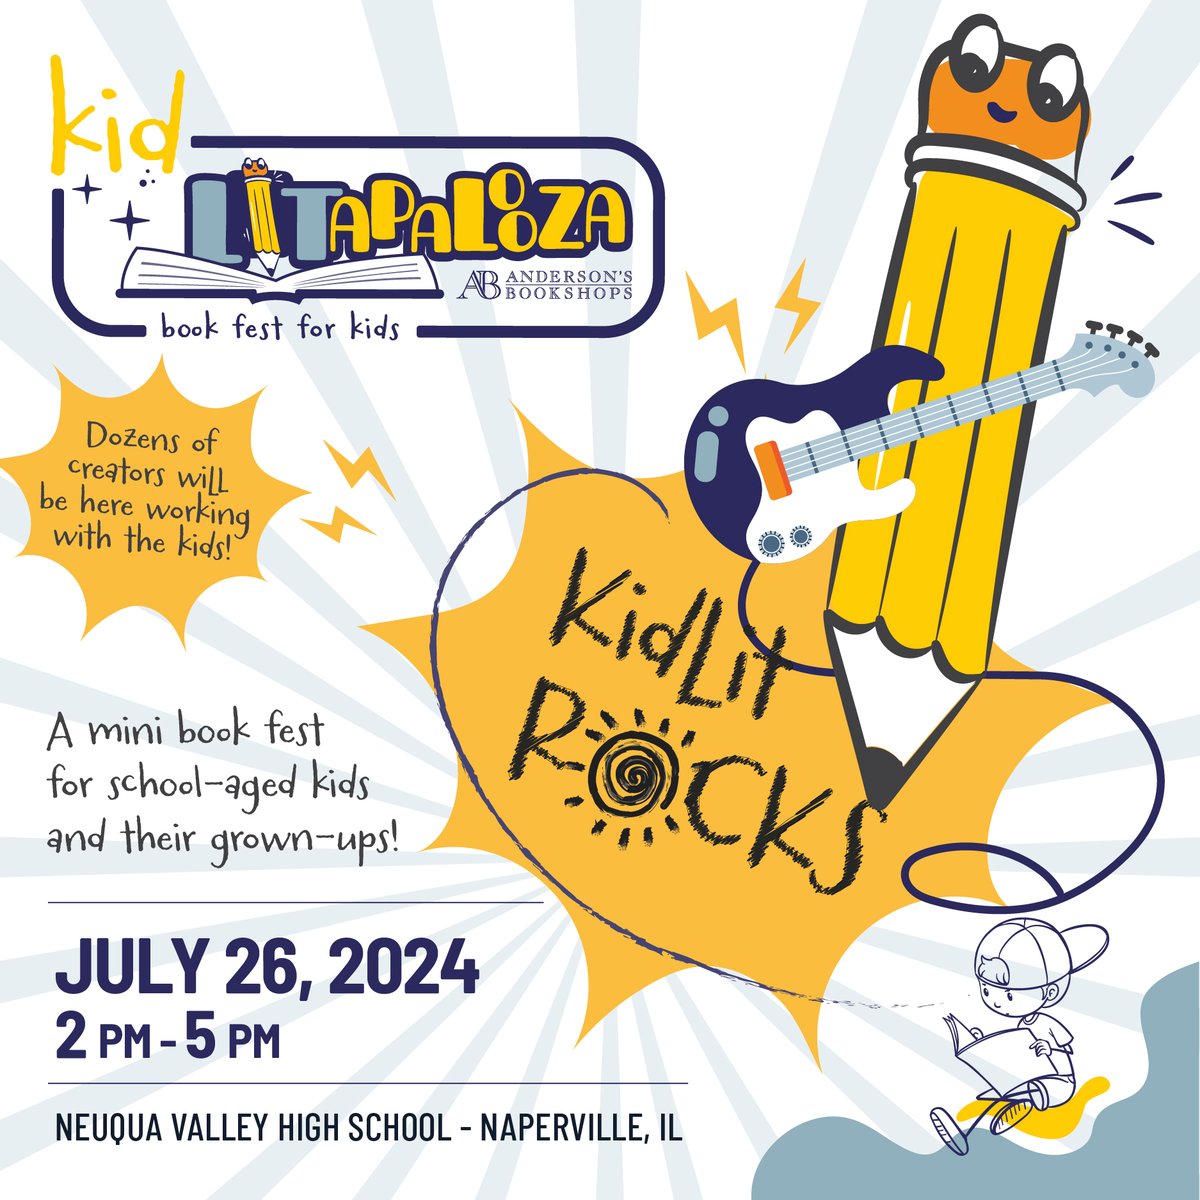 July 26th: Just $10 for kids to hang out with 50+ Authors/Illustrators, a chance to meet ALL of them and create WITH them!? kidLITapalooza: A mini-bookfest for kids in grades 1-8 this summer w/ keynote speaker Loren Long @lorenlong REGISTER: KidLITapalooza2024.eventcombo.com